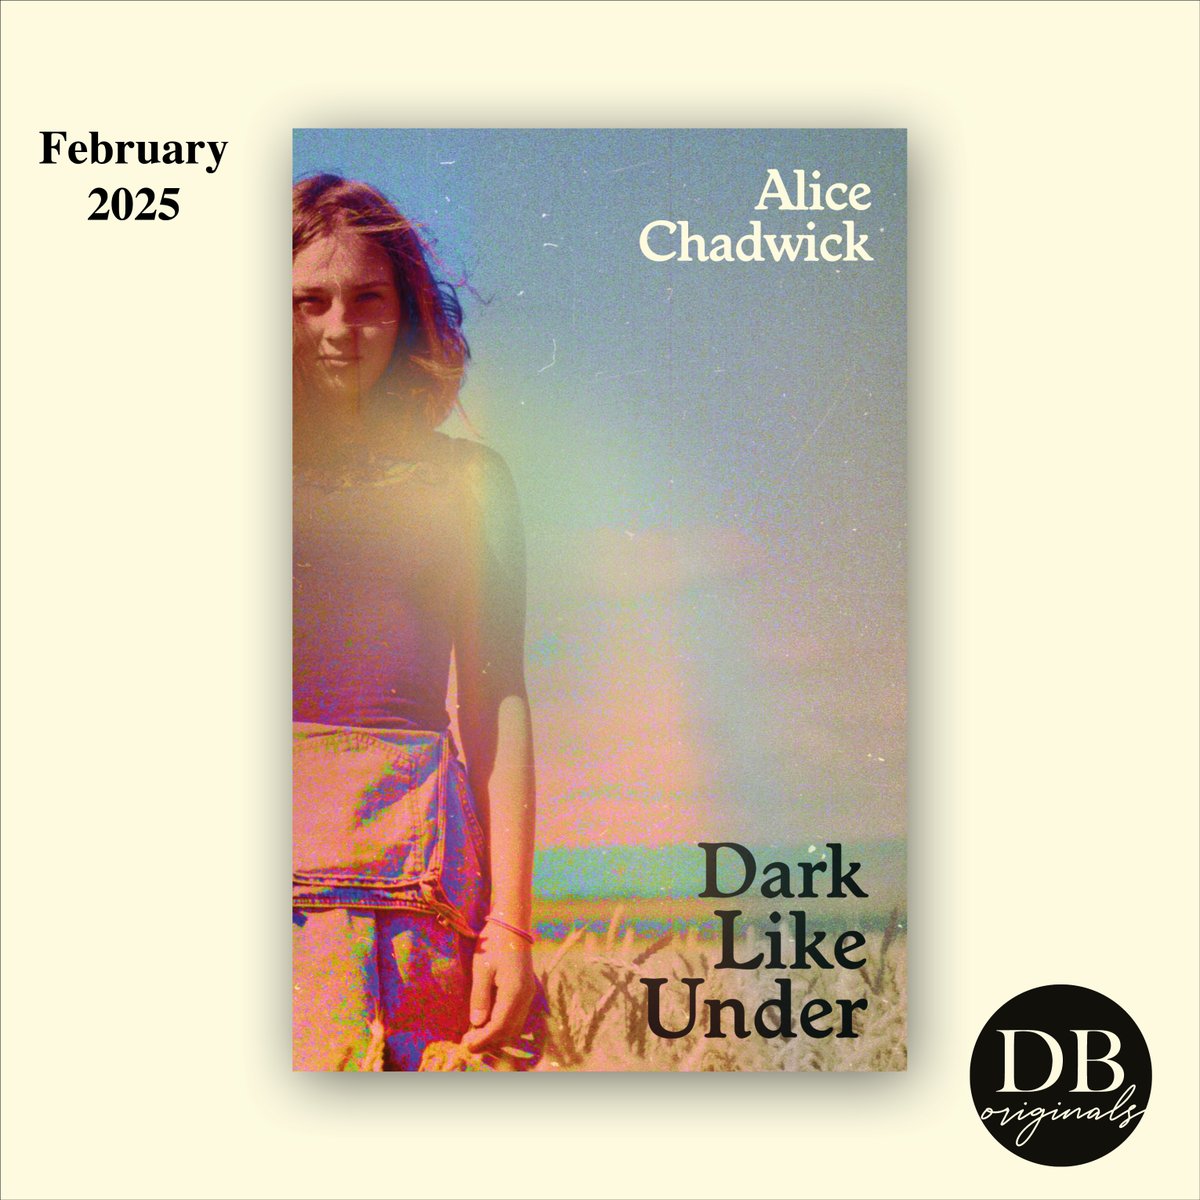 Cover reveal 📣 Alice Chadwick's DARK LIKE UNDER is a profound exploration of friendship, loneliness and grief. Set over one school day in the 1980s, this debut, thrumming with life, captures the promise and risk of late adolescence. Out Feb 2025.